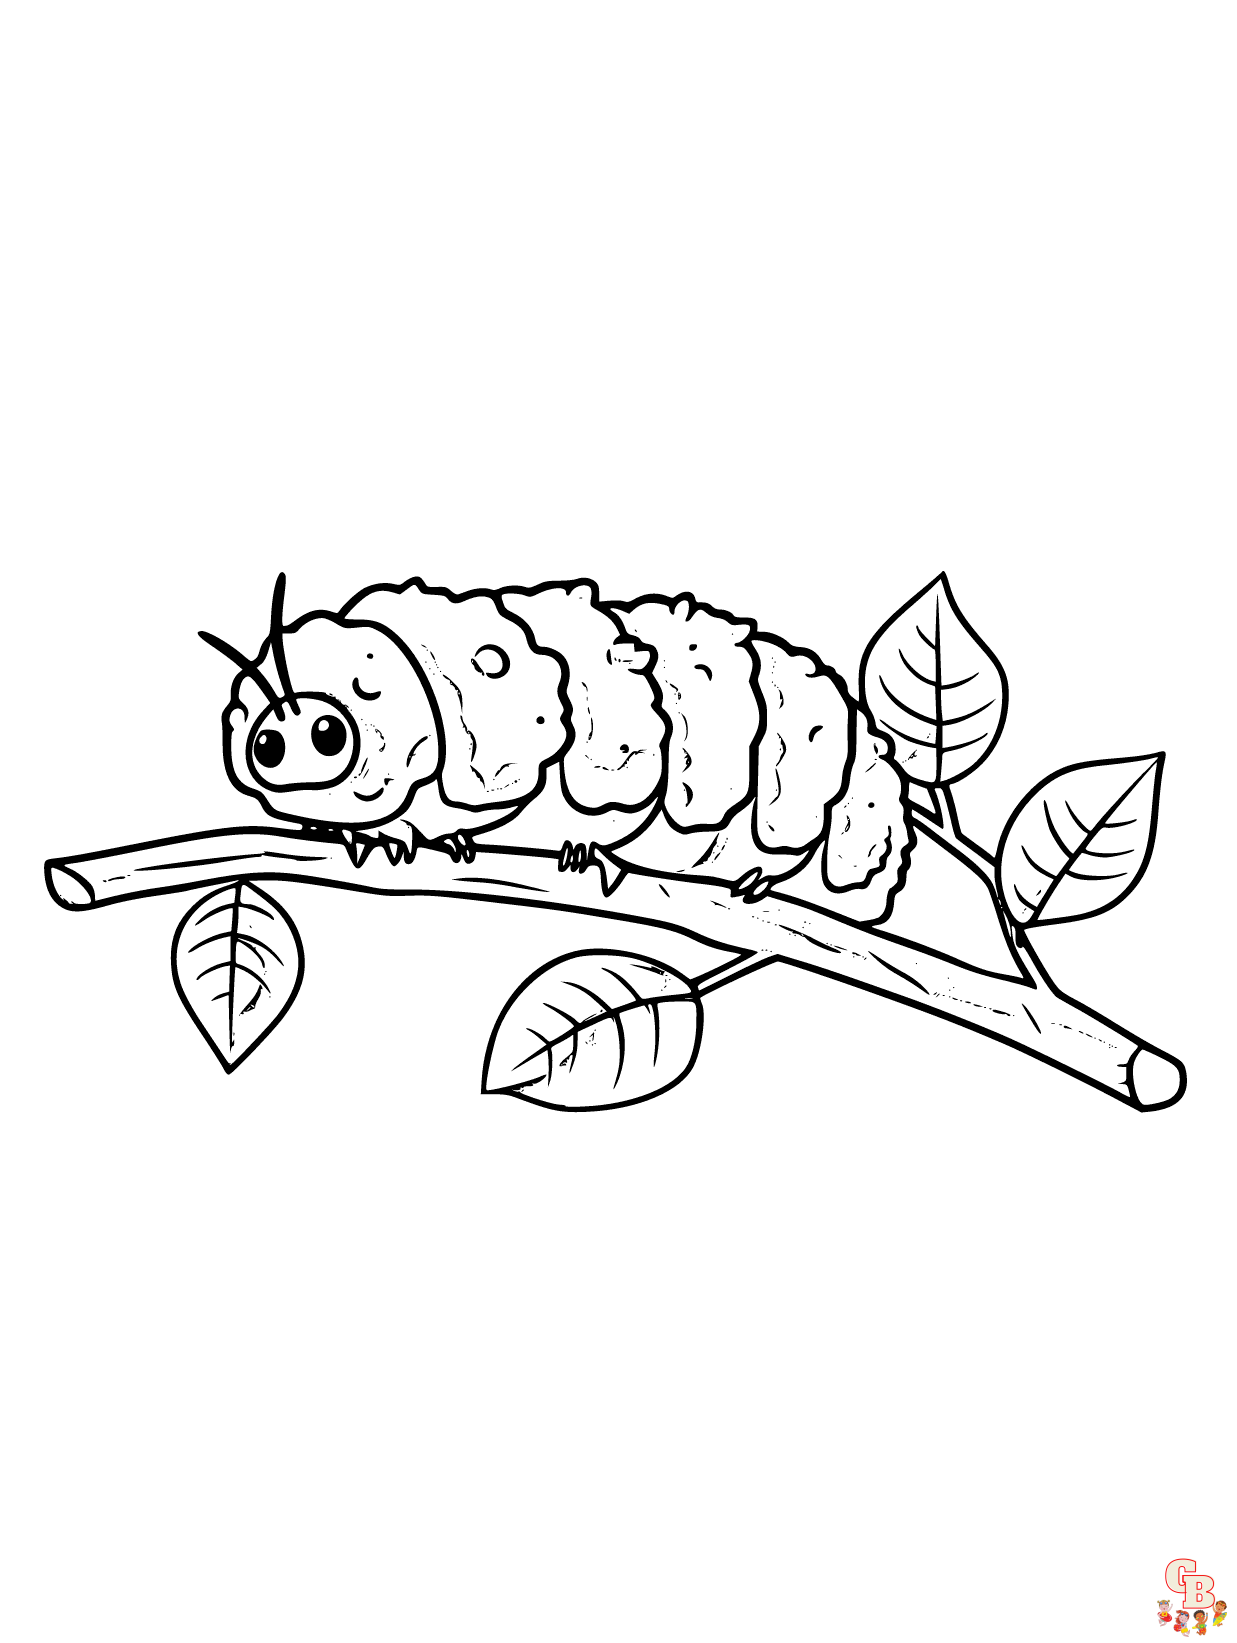 Caterpillar coloring pages 2